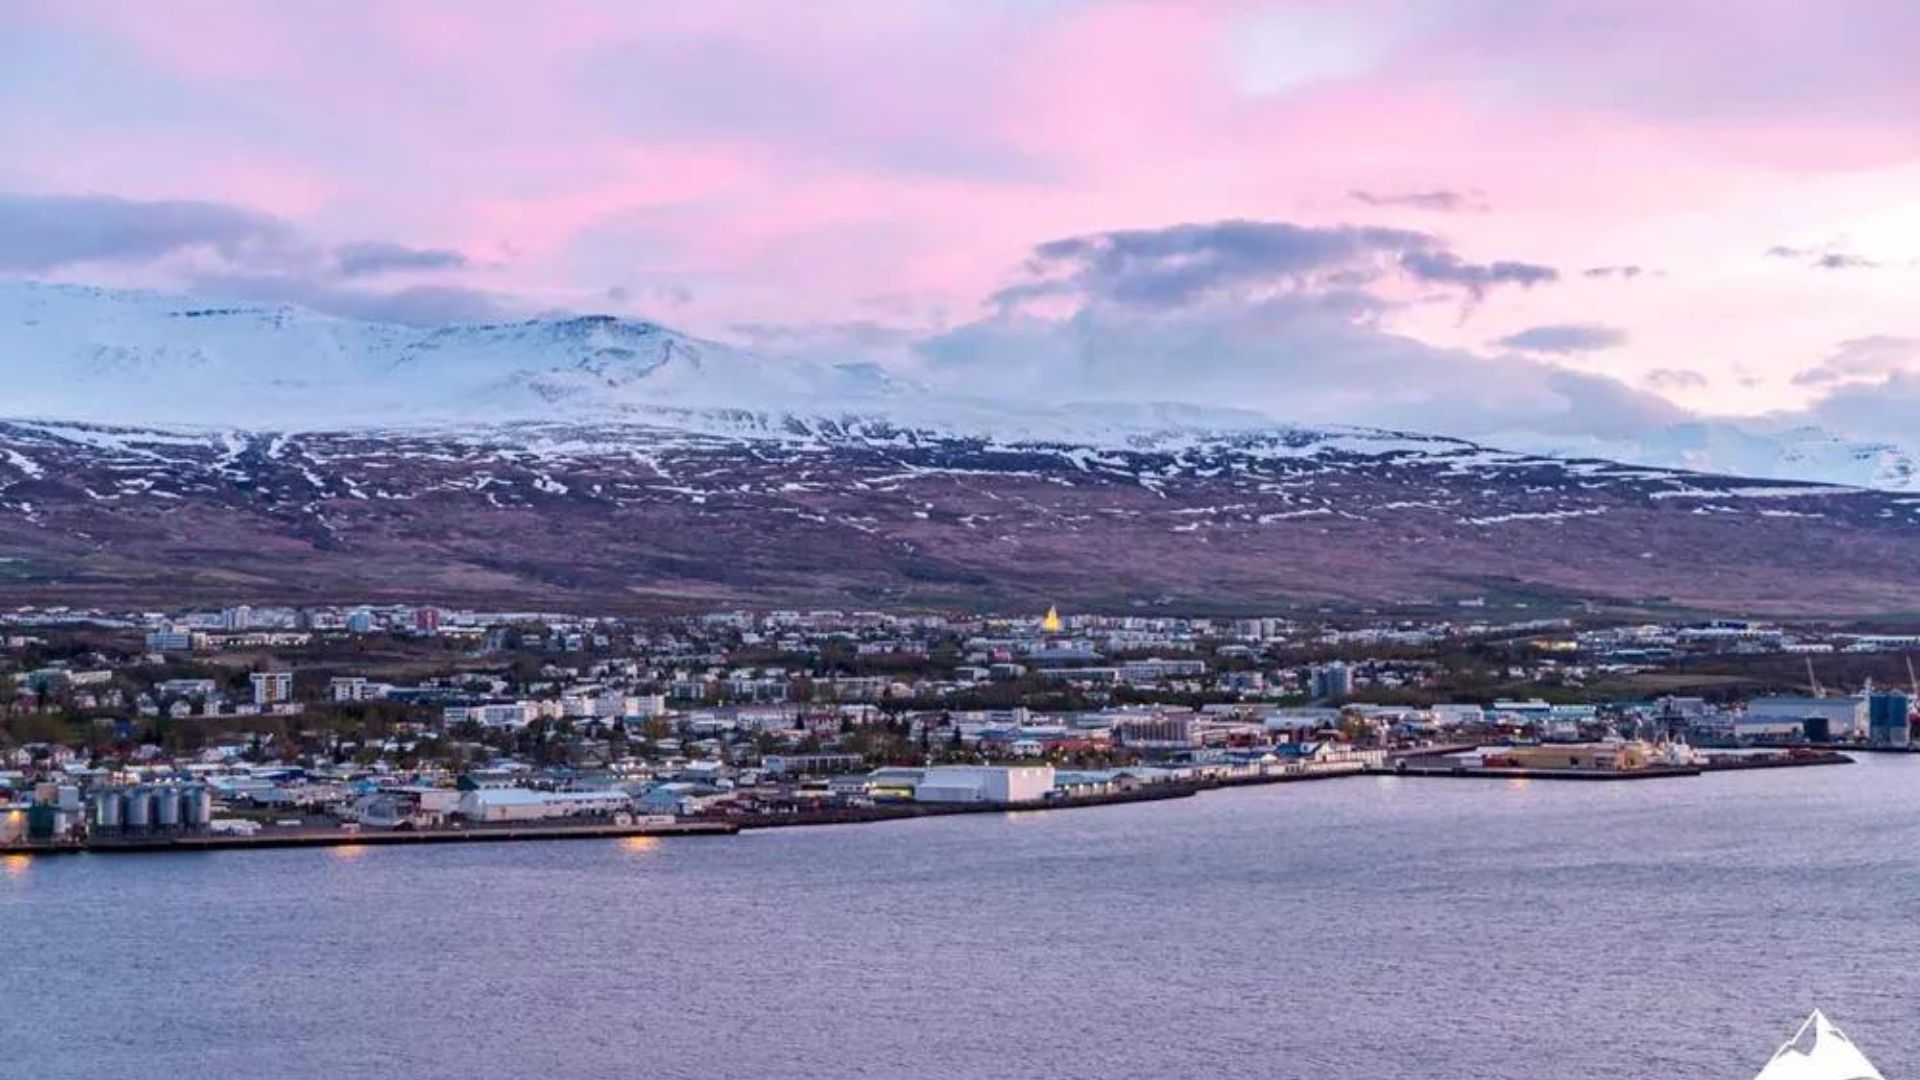 One of the town in North Iceland